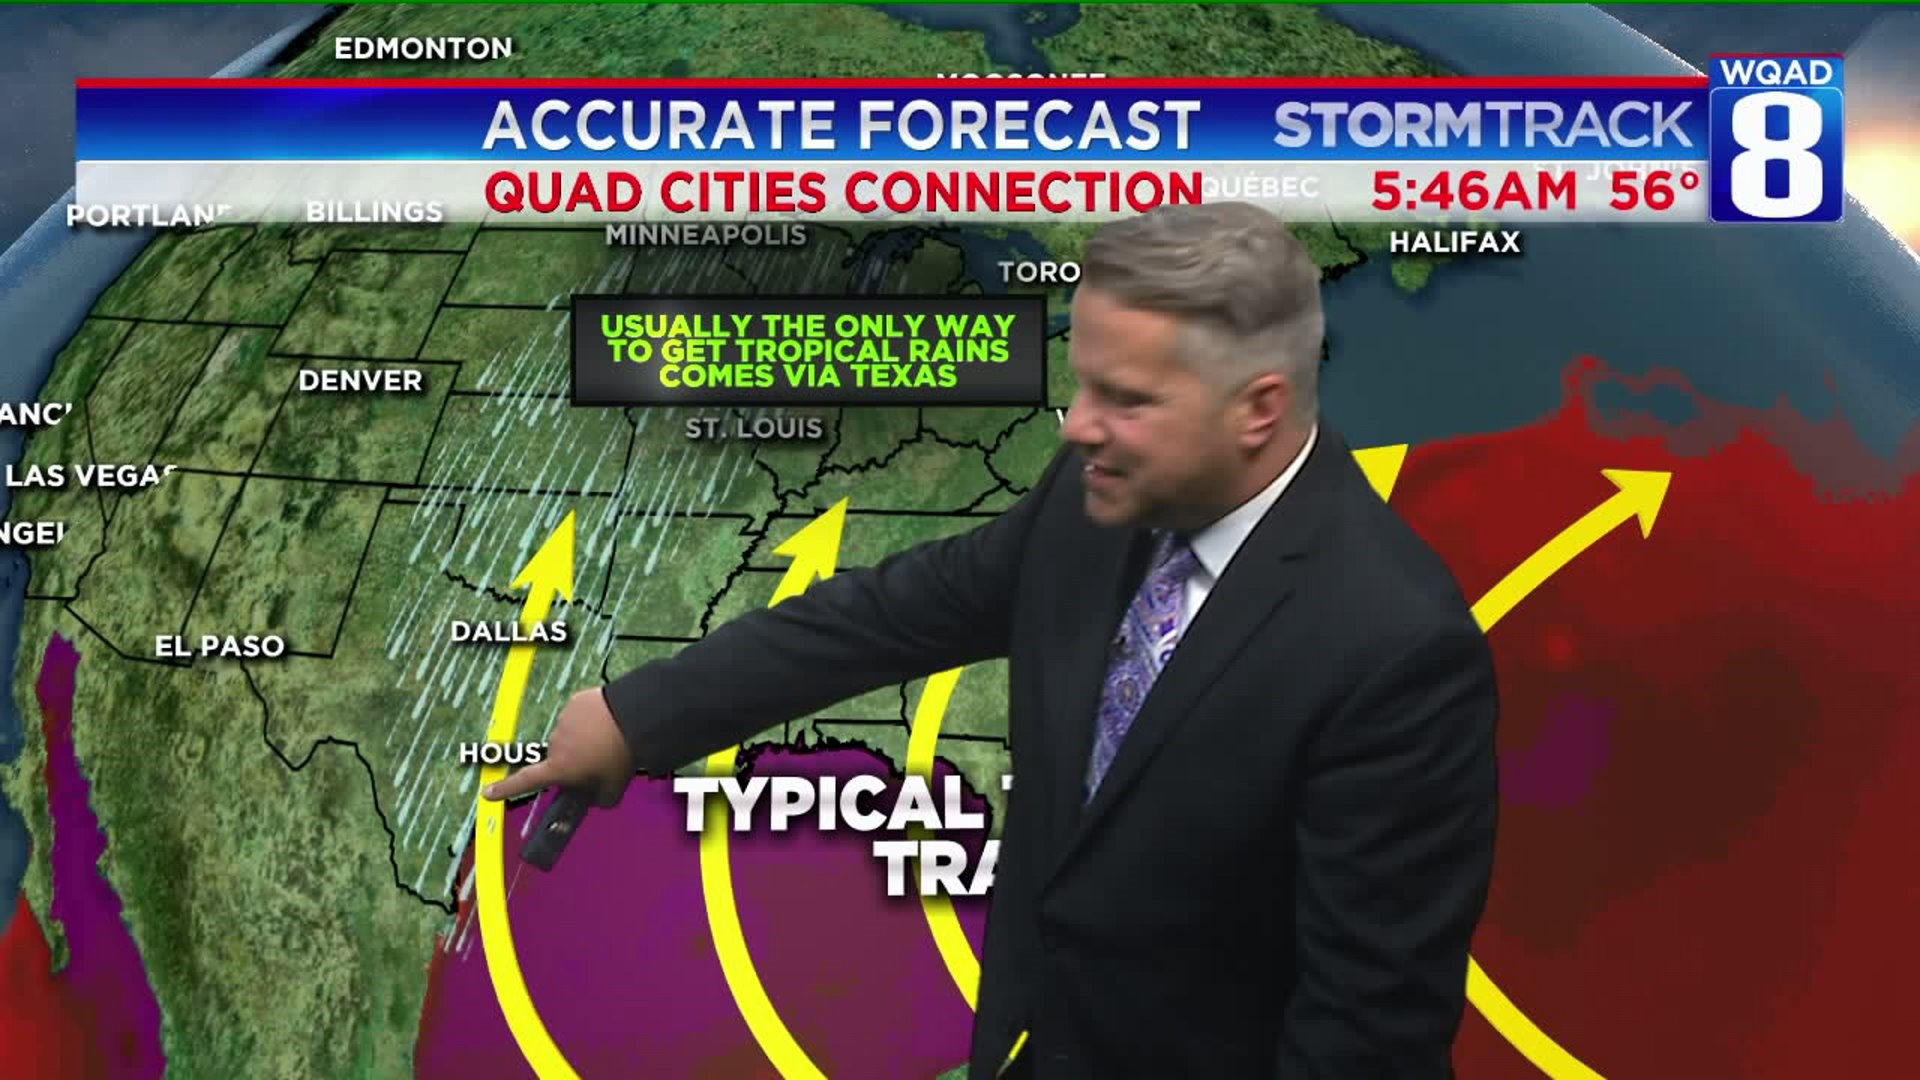 Eric explains the only way the Quad Cities could get tropical storm rainfall